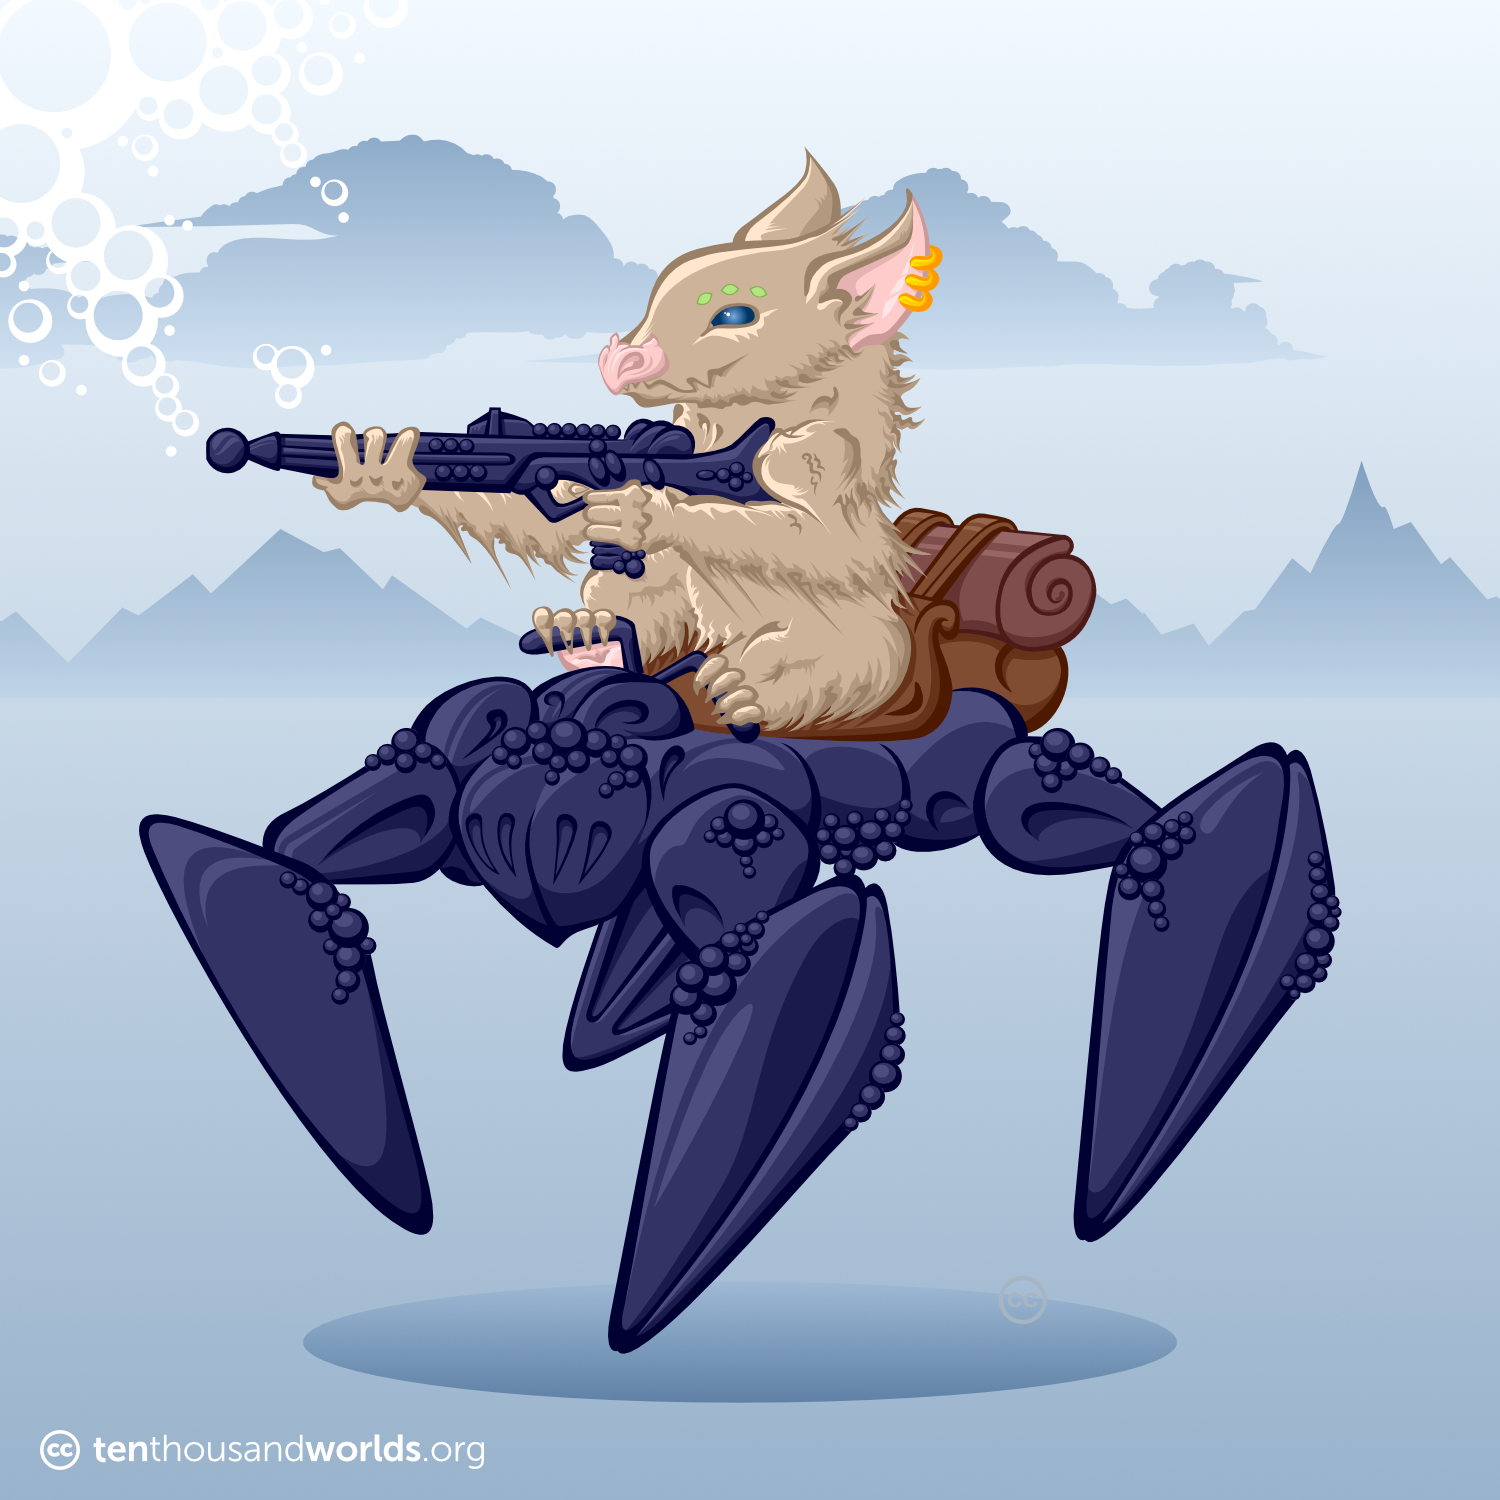 A creature like a tan, long-furred koala with a bat-like face rides a blue-black, four-legged insect-shaped machine; holding a blue-black rifle in its fore-paws and steering with its hind-paws.